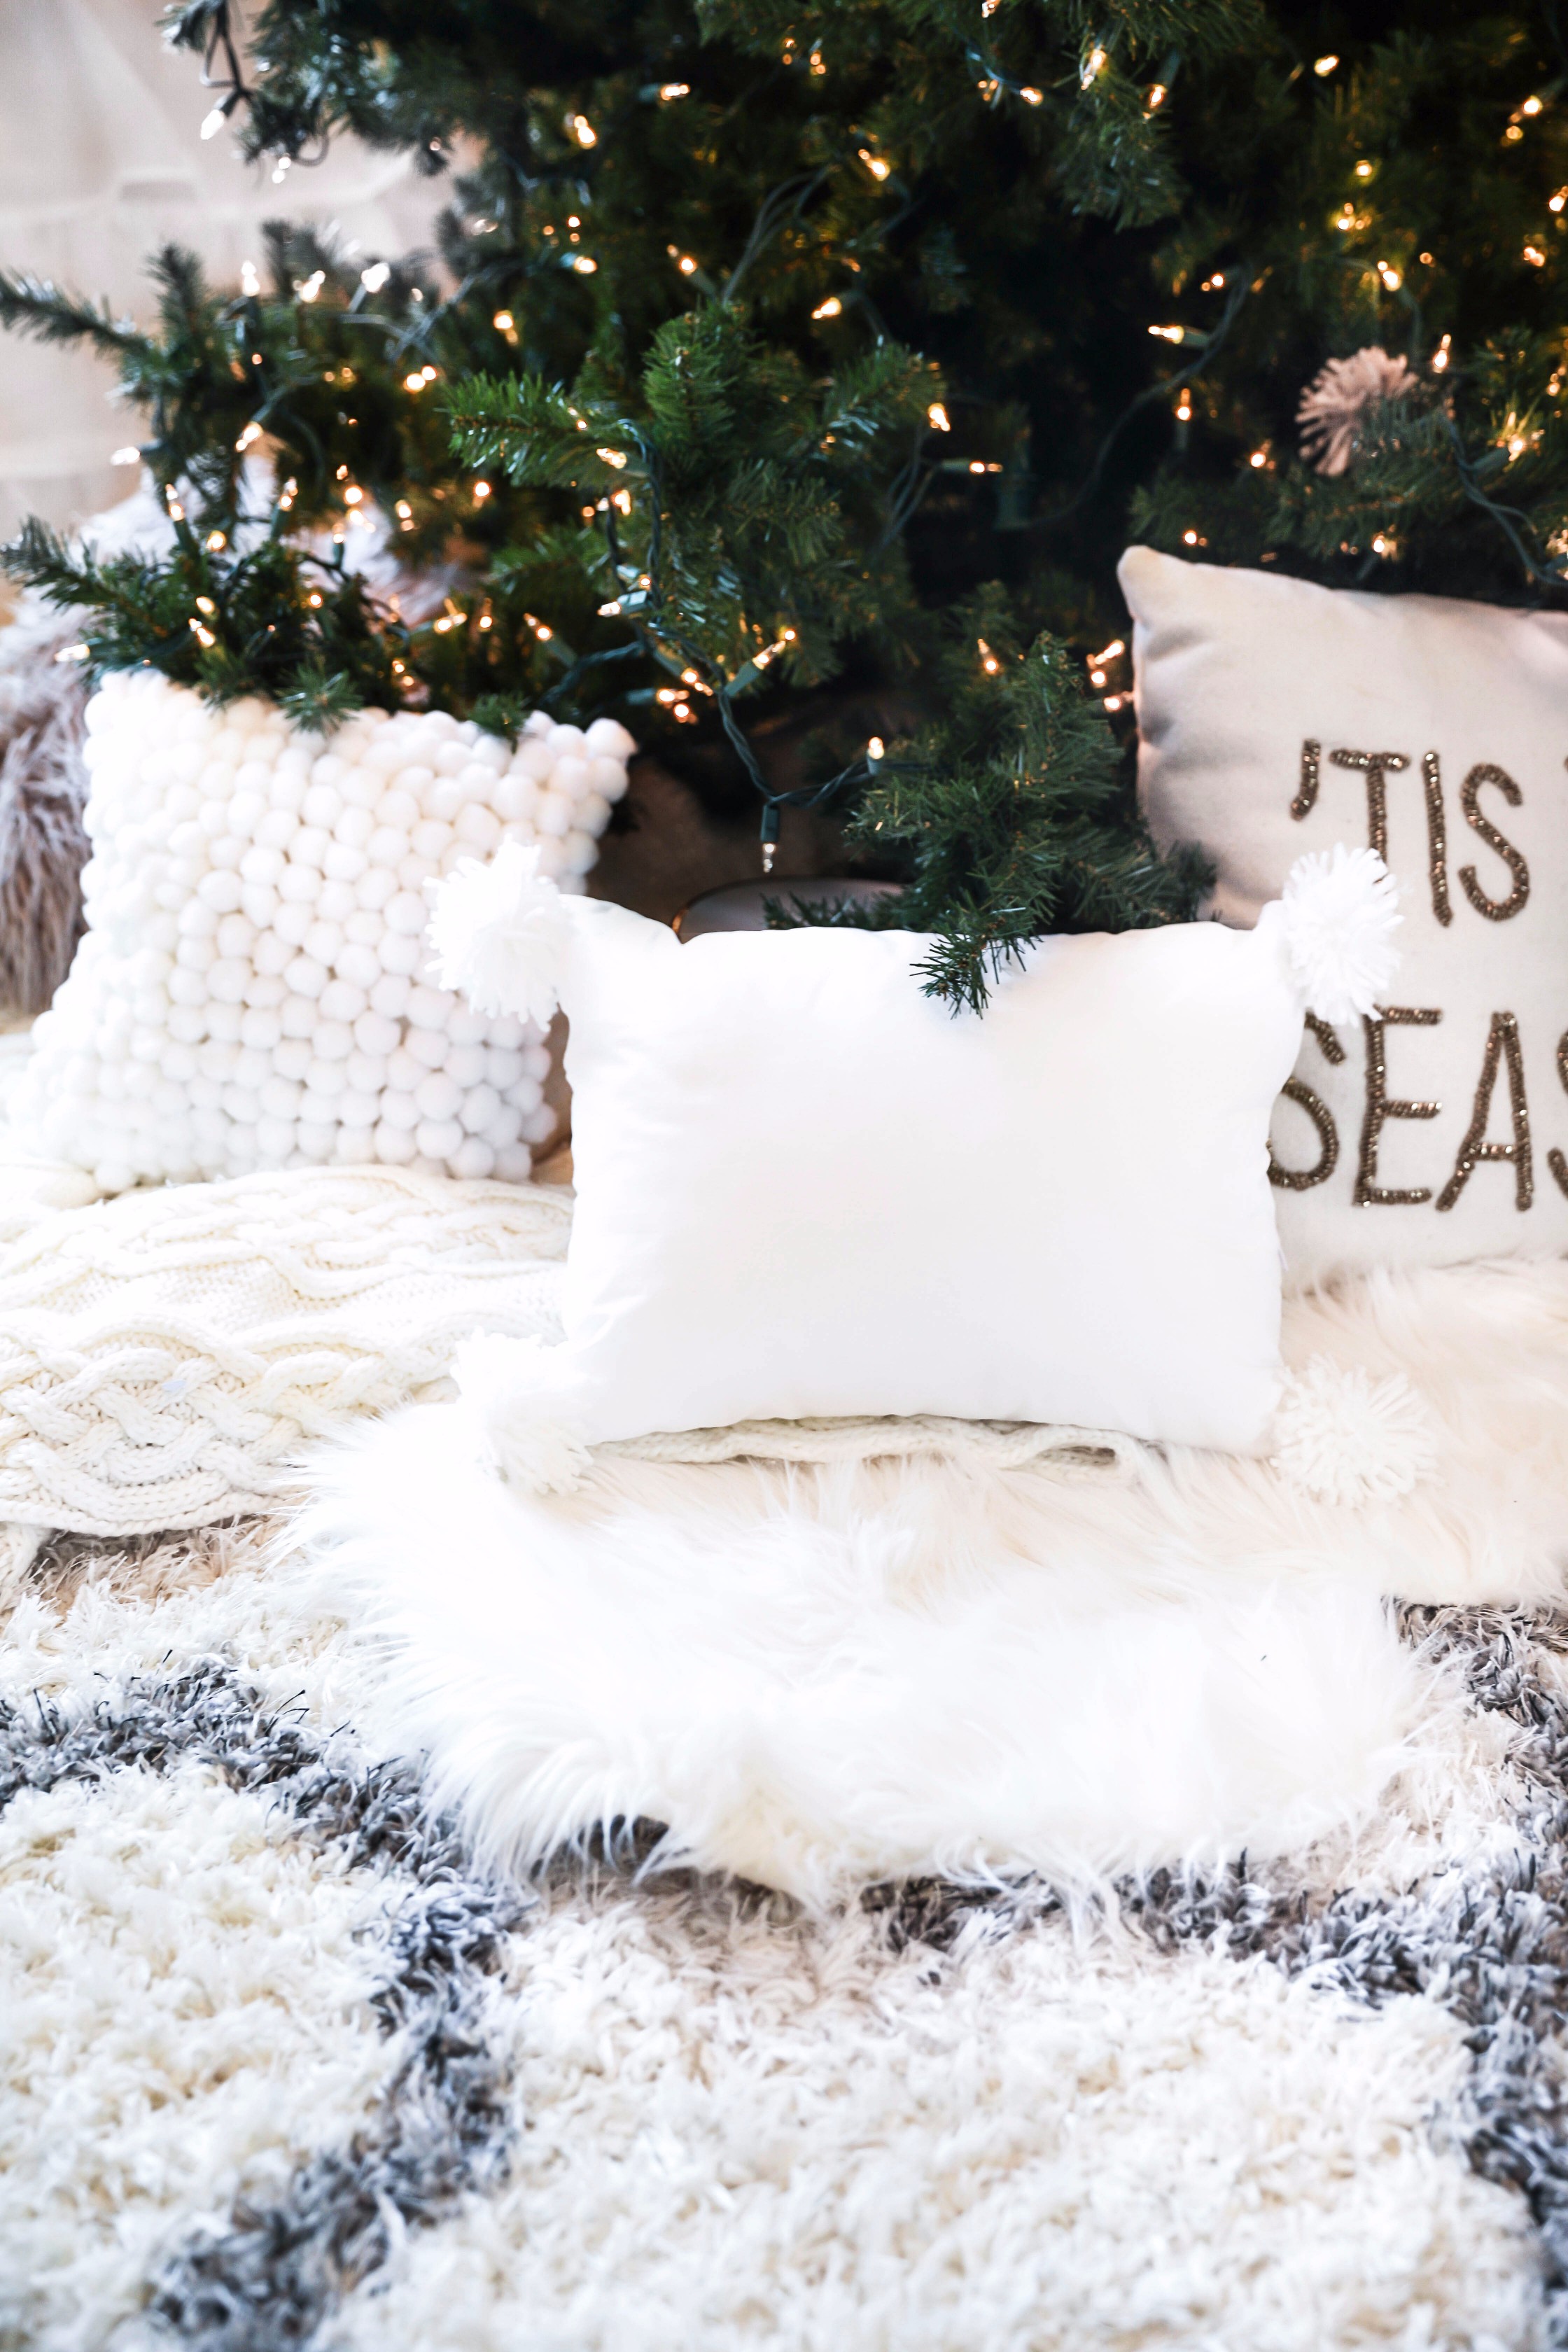 Holiday DIY decor! Learn how to make DIY snowball ornaments, tassel ornaments, pom pom ornaments, pom pom pillows, and pom pom garlands! Details on daily dose of charm lauren lindmark